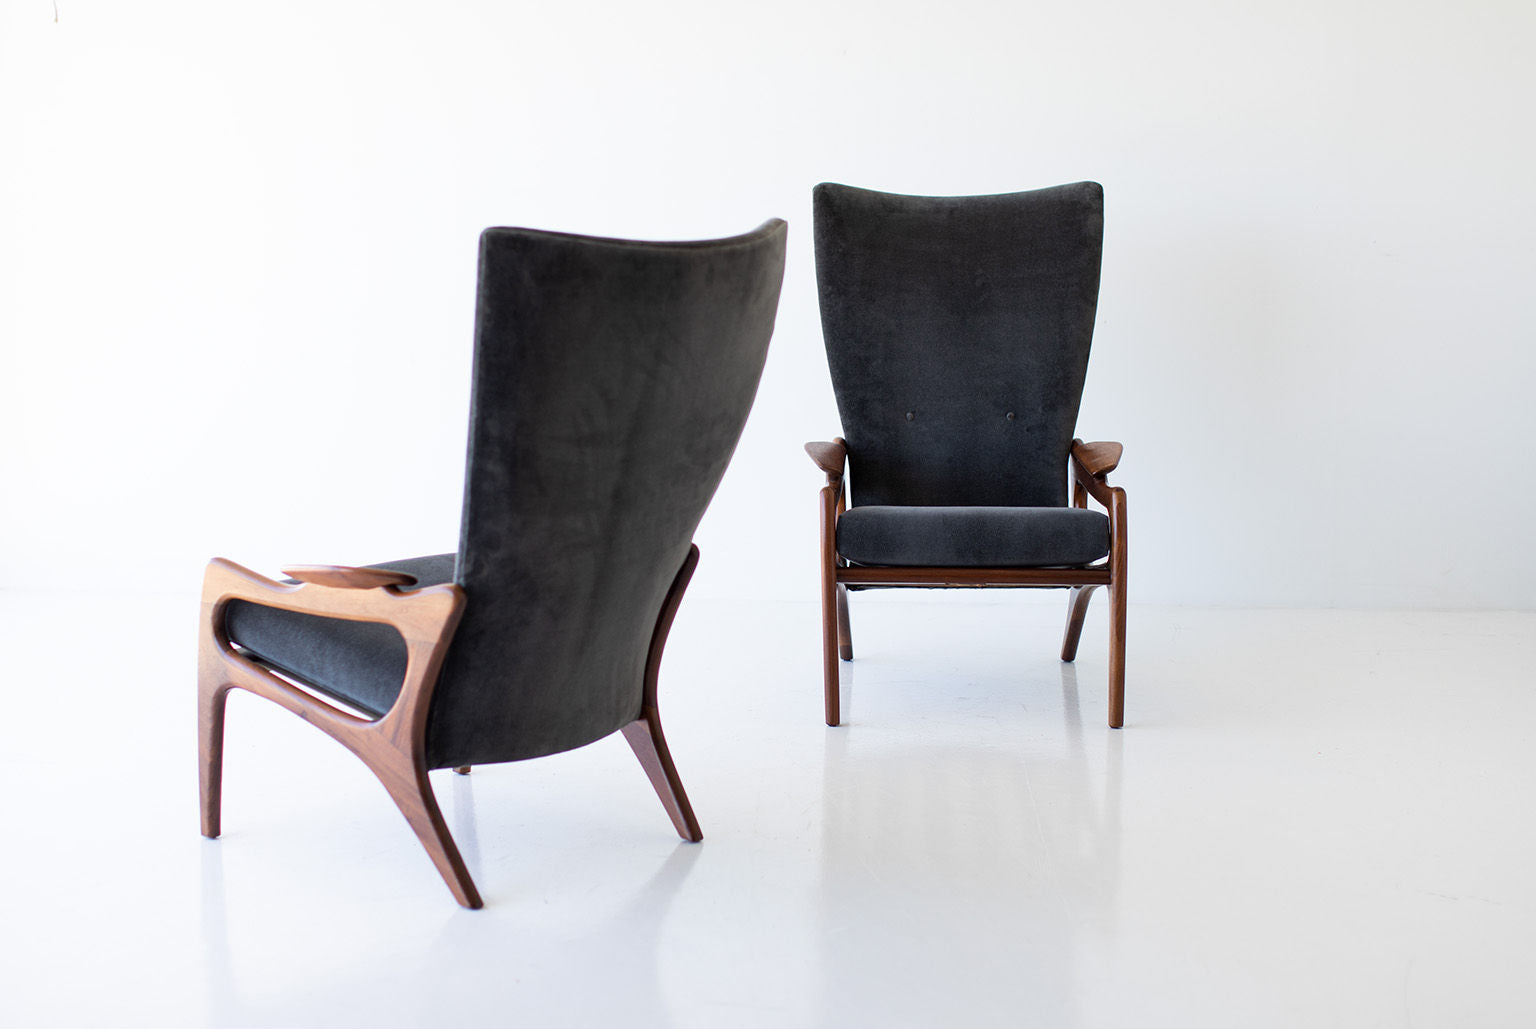 Adrian Pearsall High Back Lounge Chairs for Craft Associates Inc.